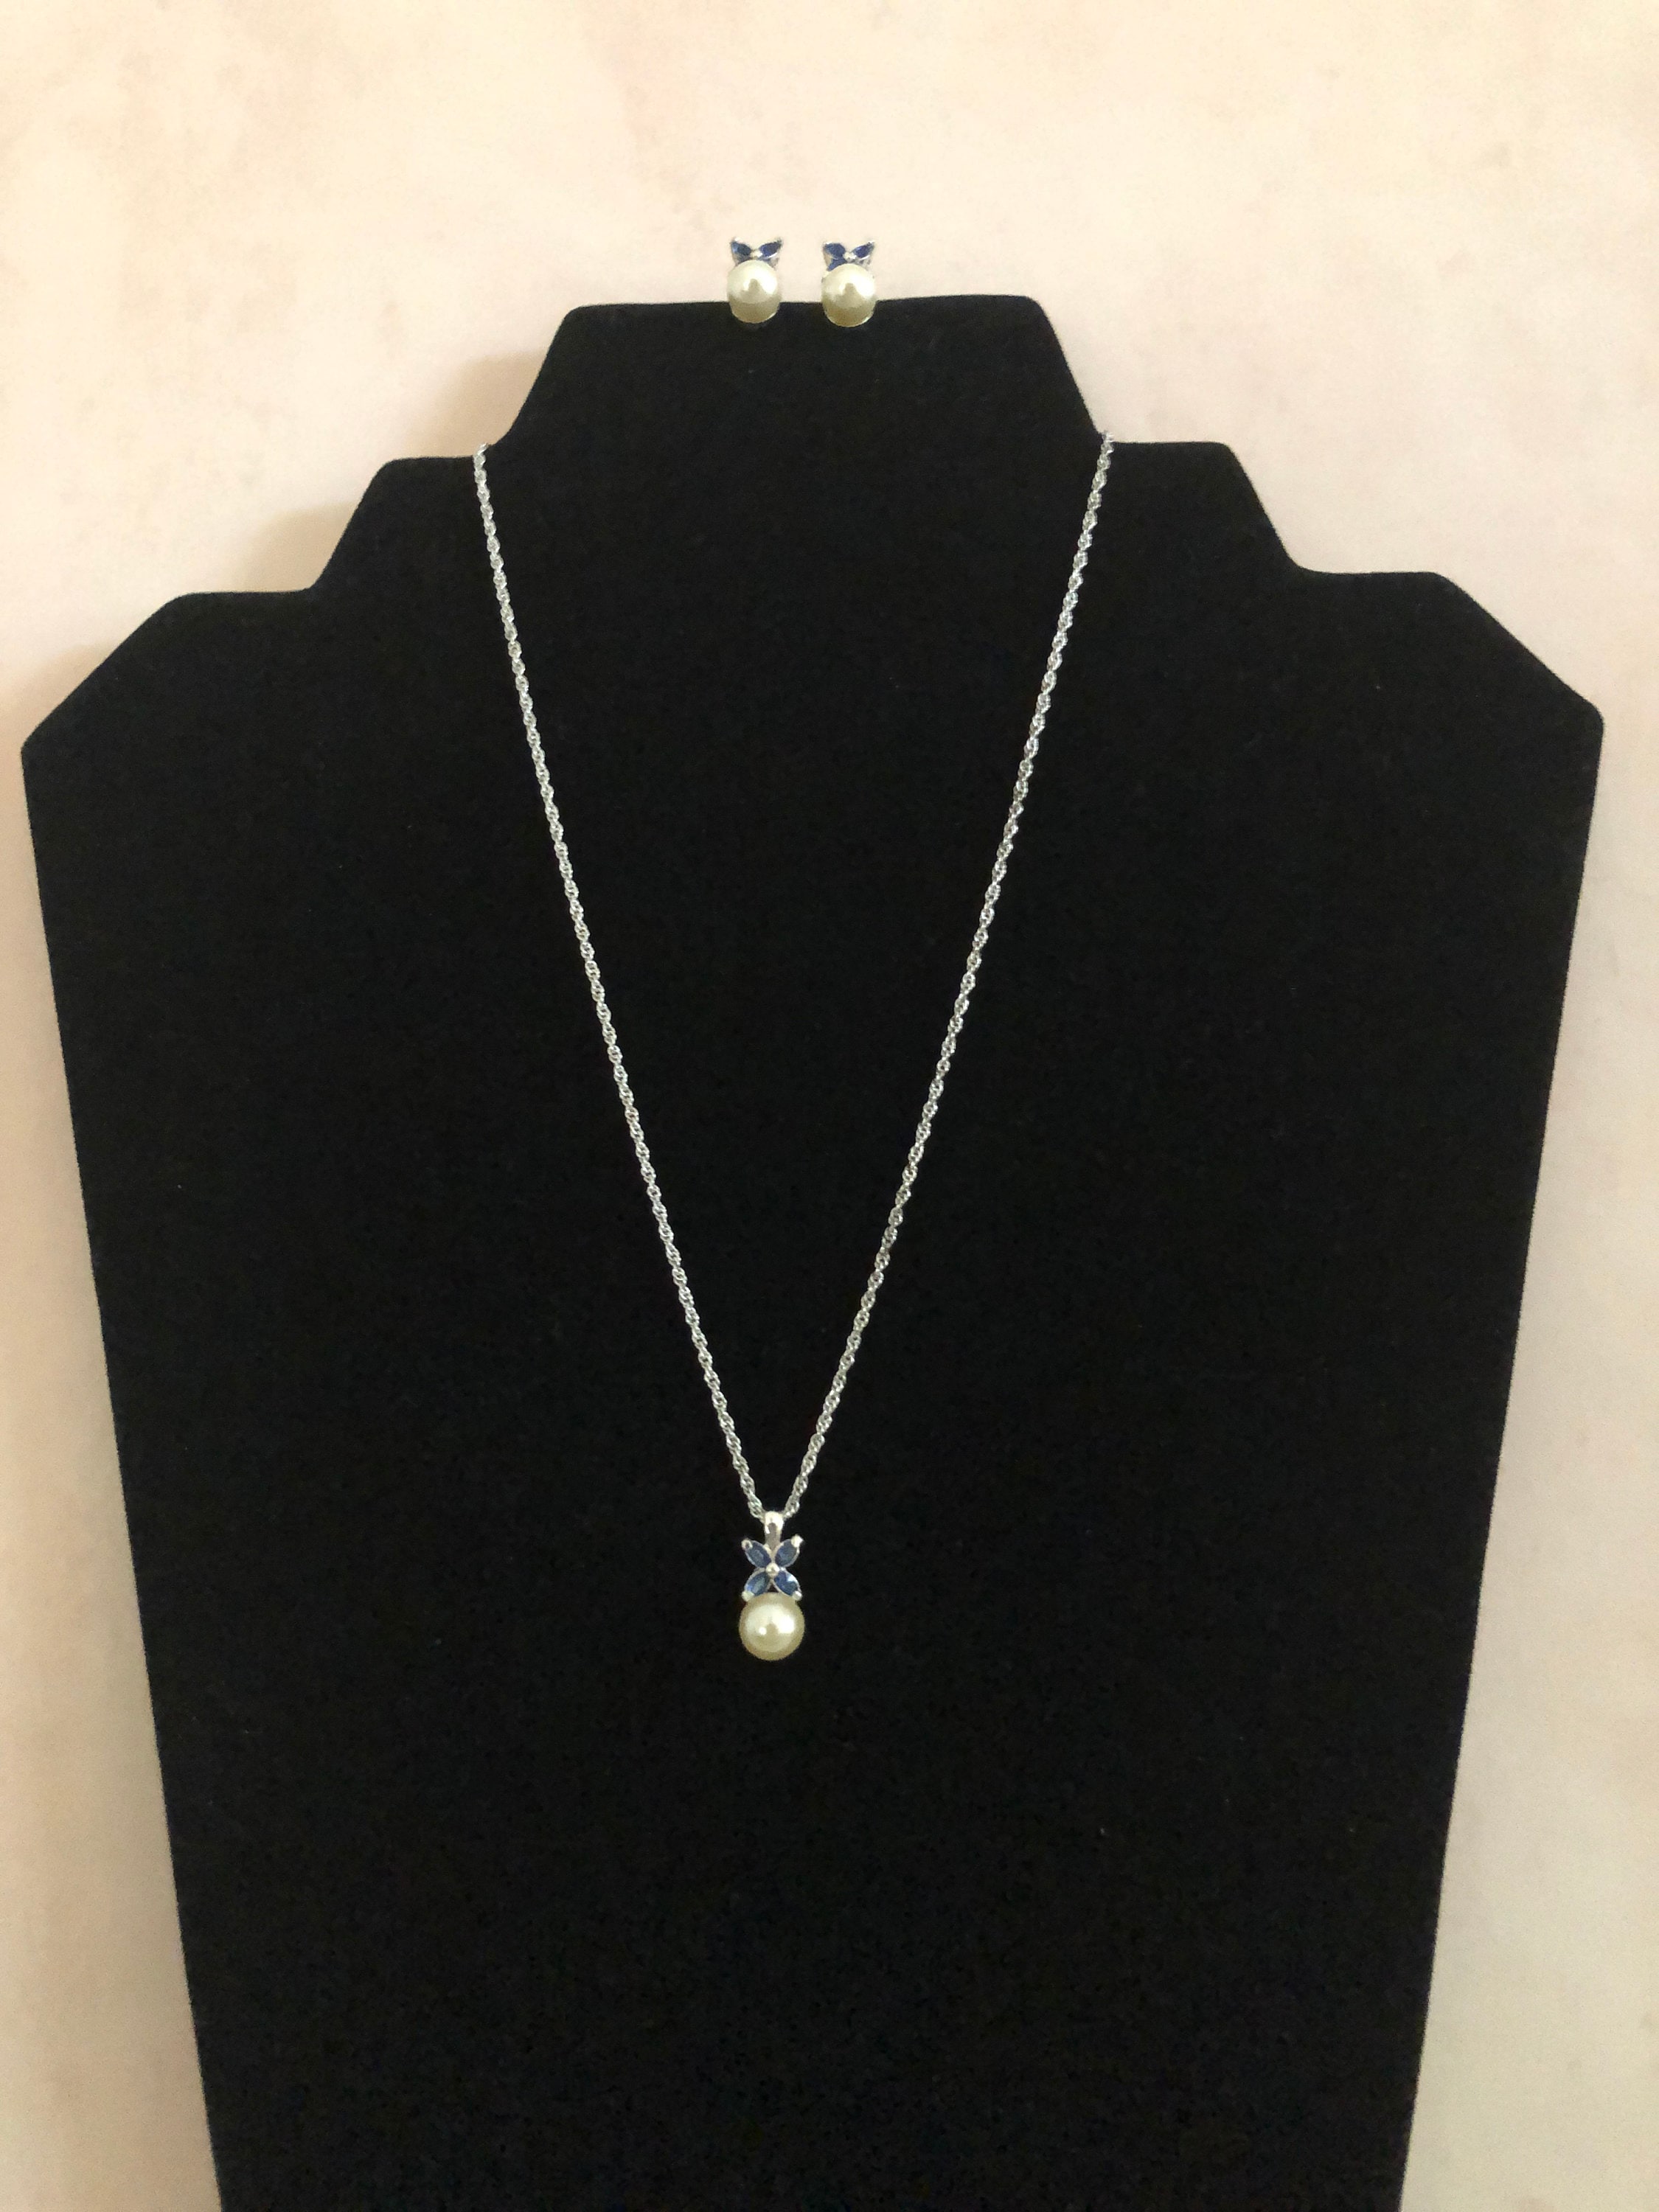 Avon Pearl and Blue Sapphire Necklace and Earring Set - Etsy